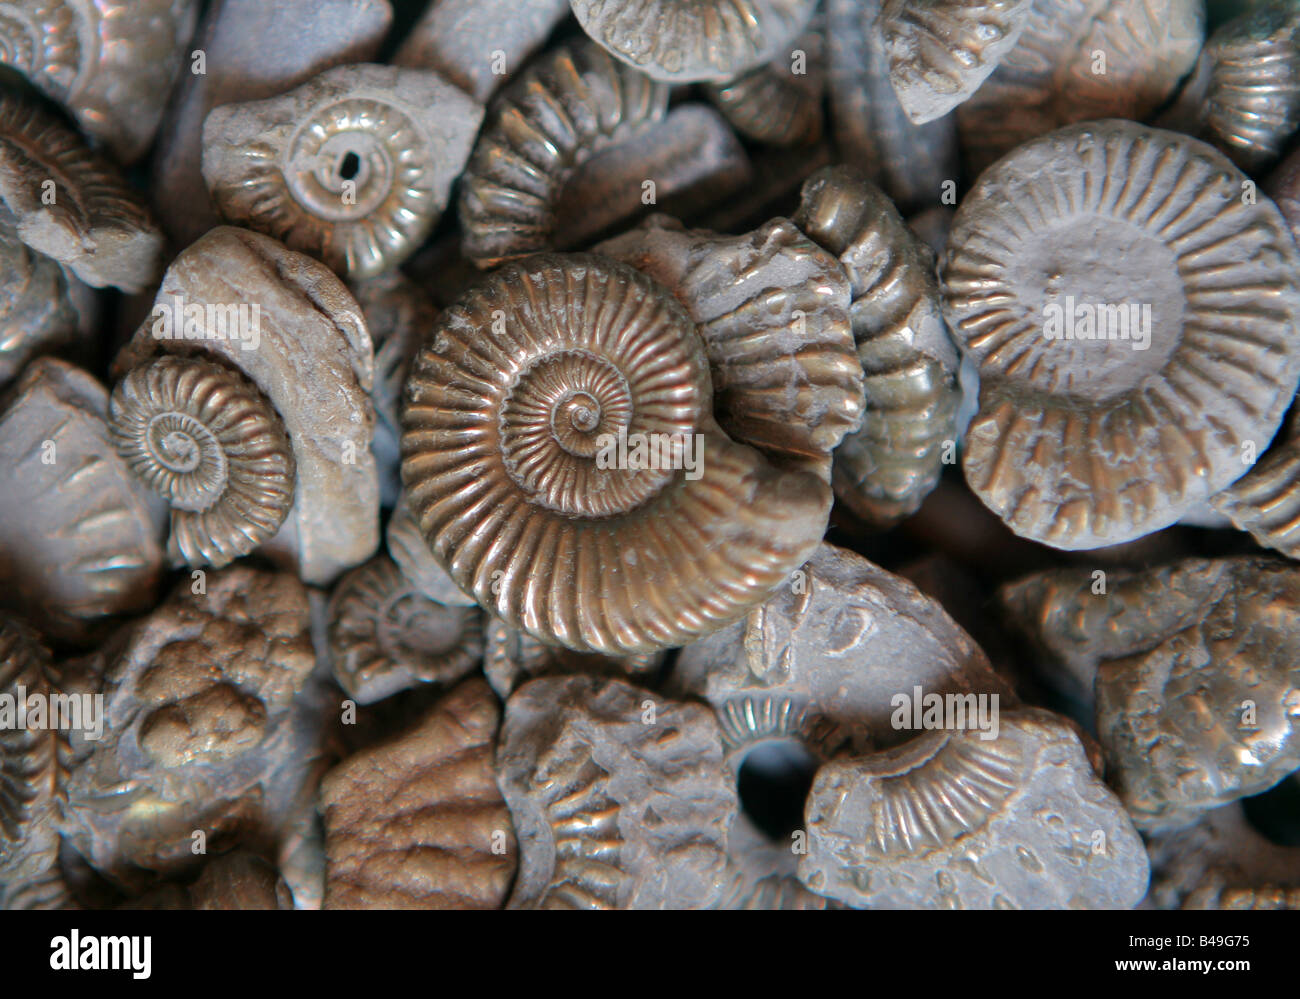 Ammonite fossils in fool's gold (iron byrite) collected on the beach at Seatown, Dorset, England. Stock Photo